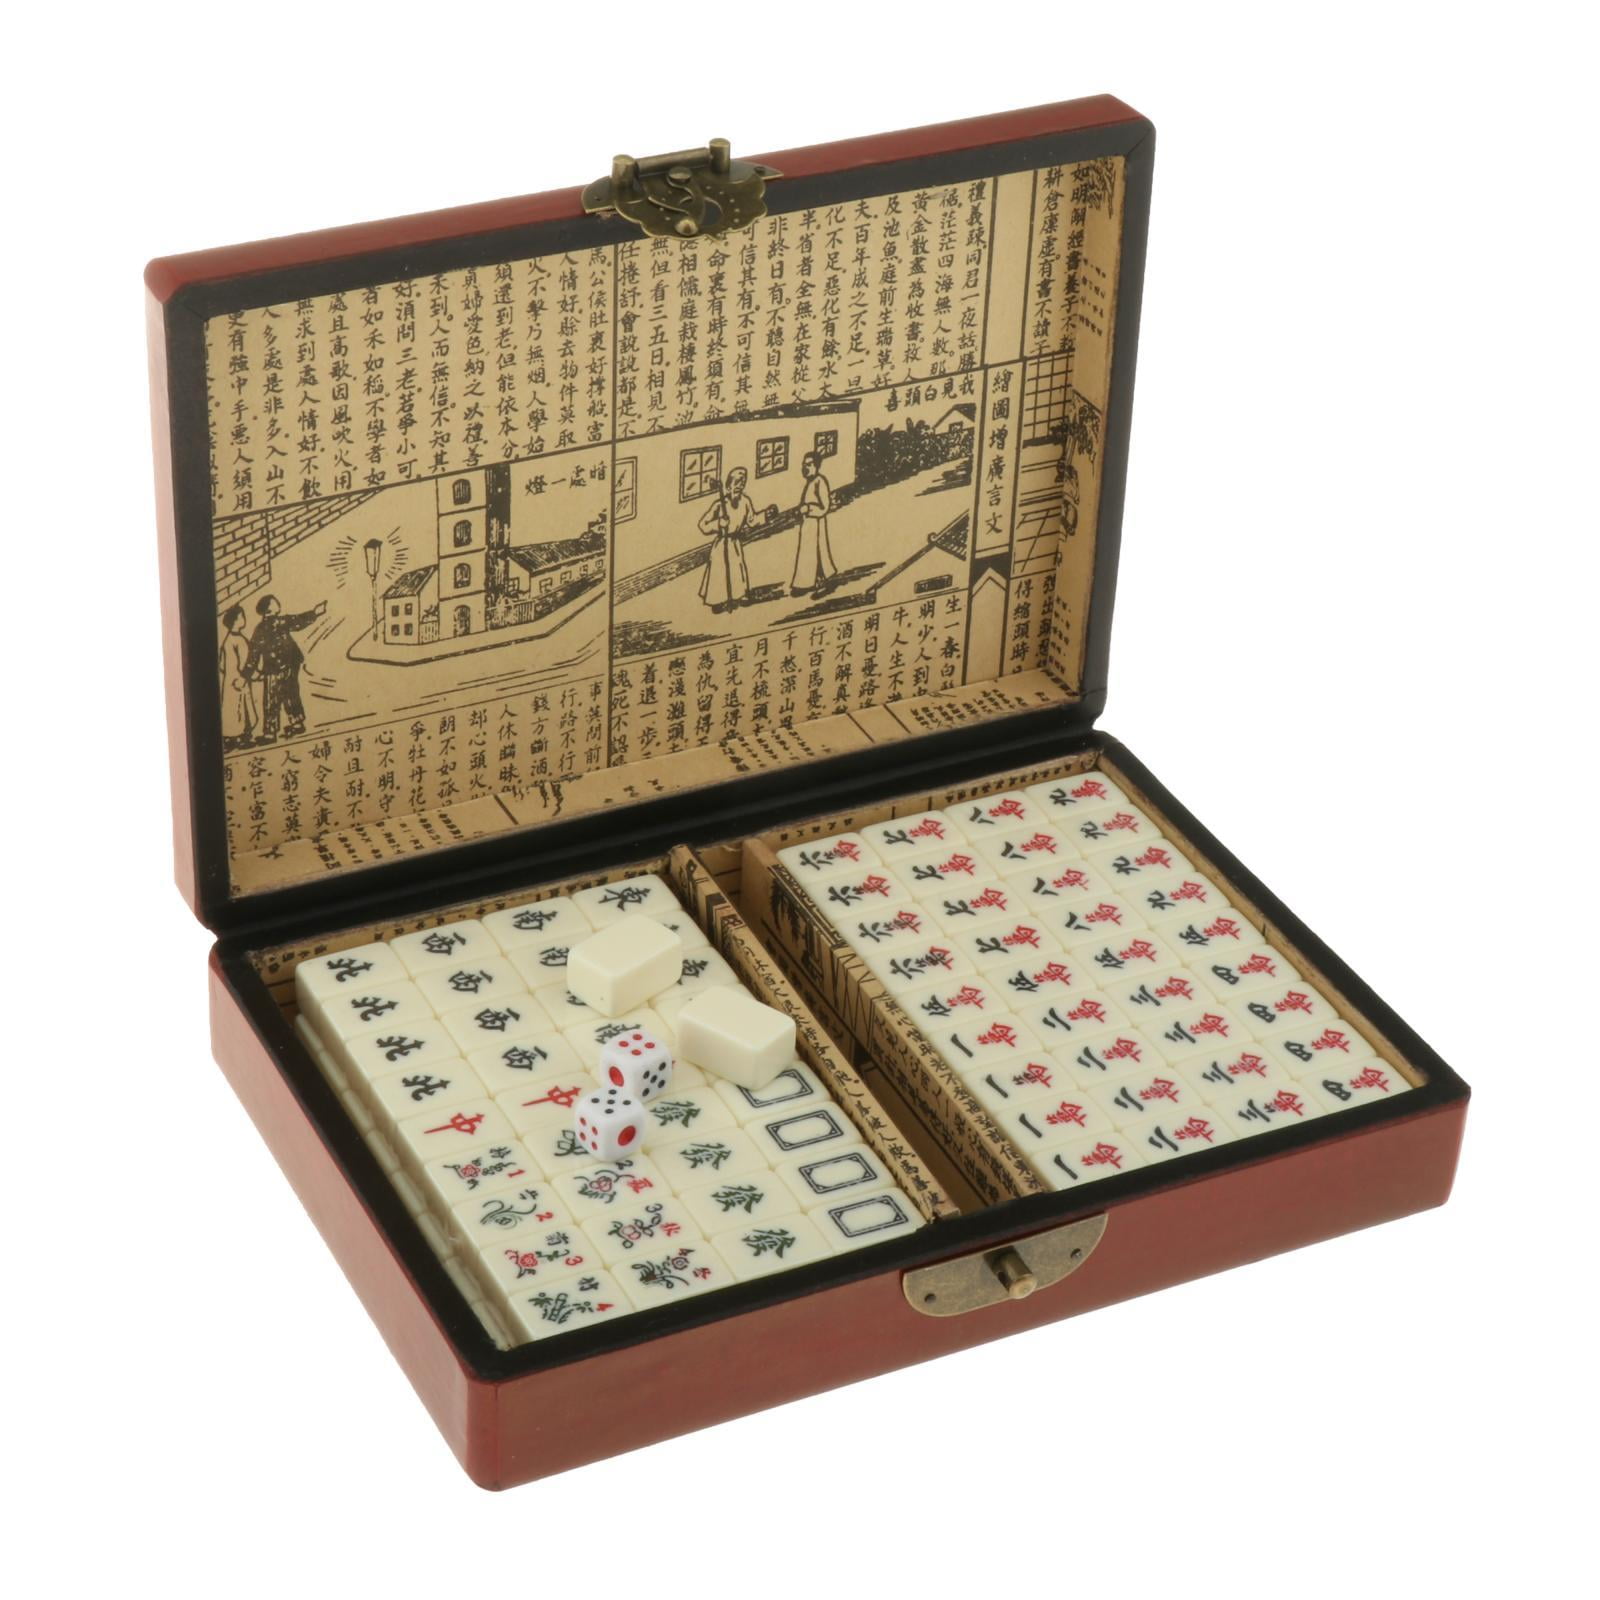 Chinese Mahjong with Wooden Box 9 x 6 x 2 inches (23x16.2x4.5